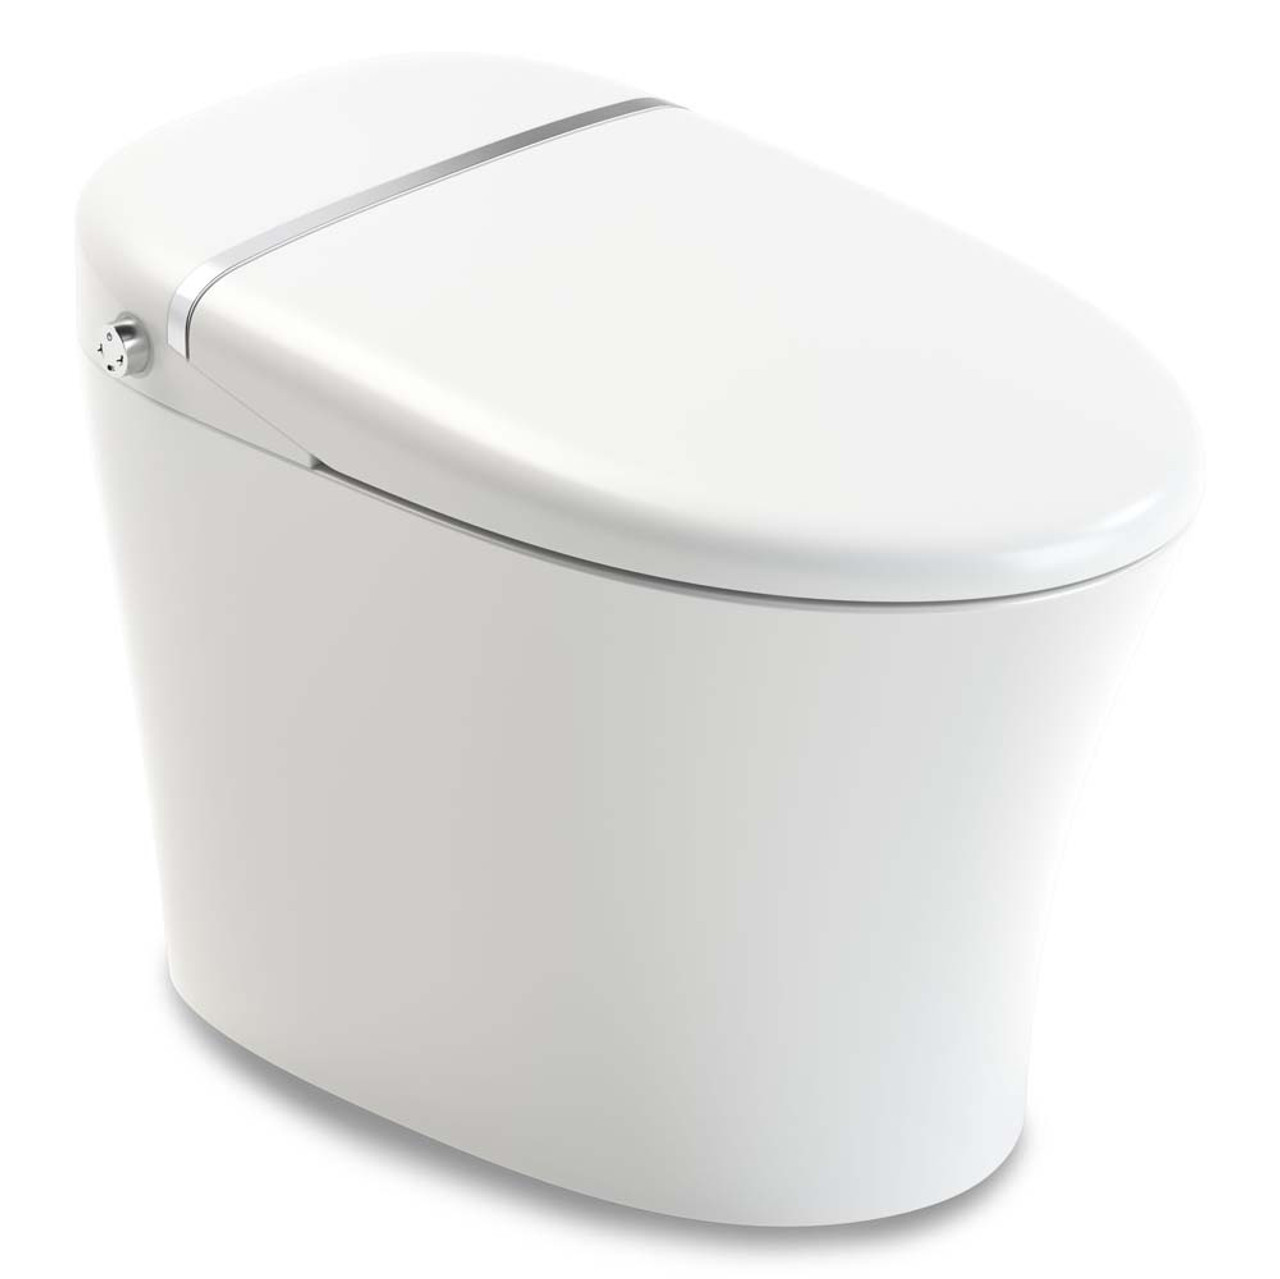 Portaloo Toilet Paper Stand and Reserve – Chensi